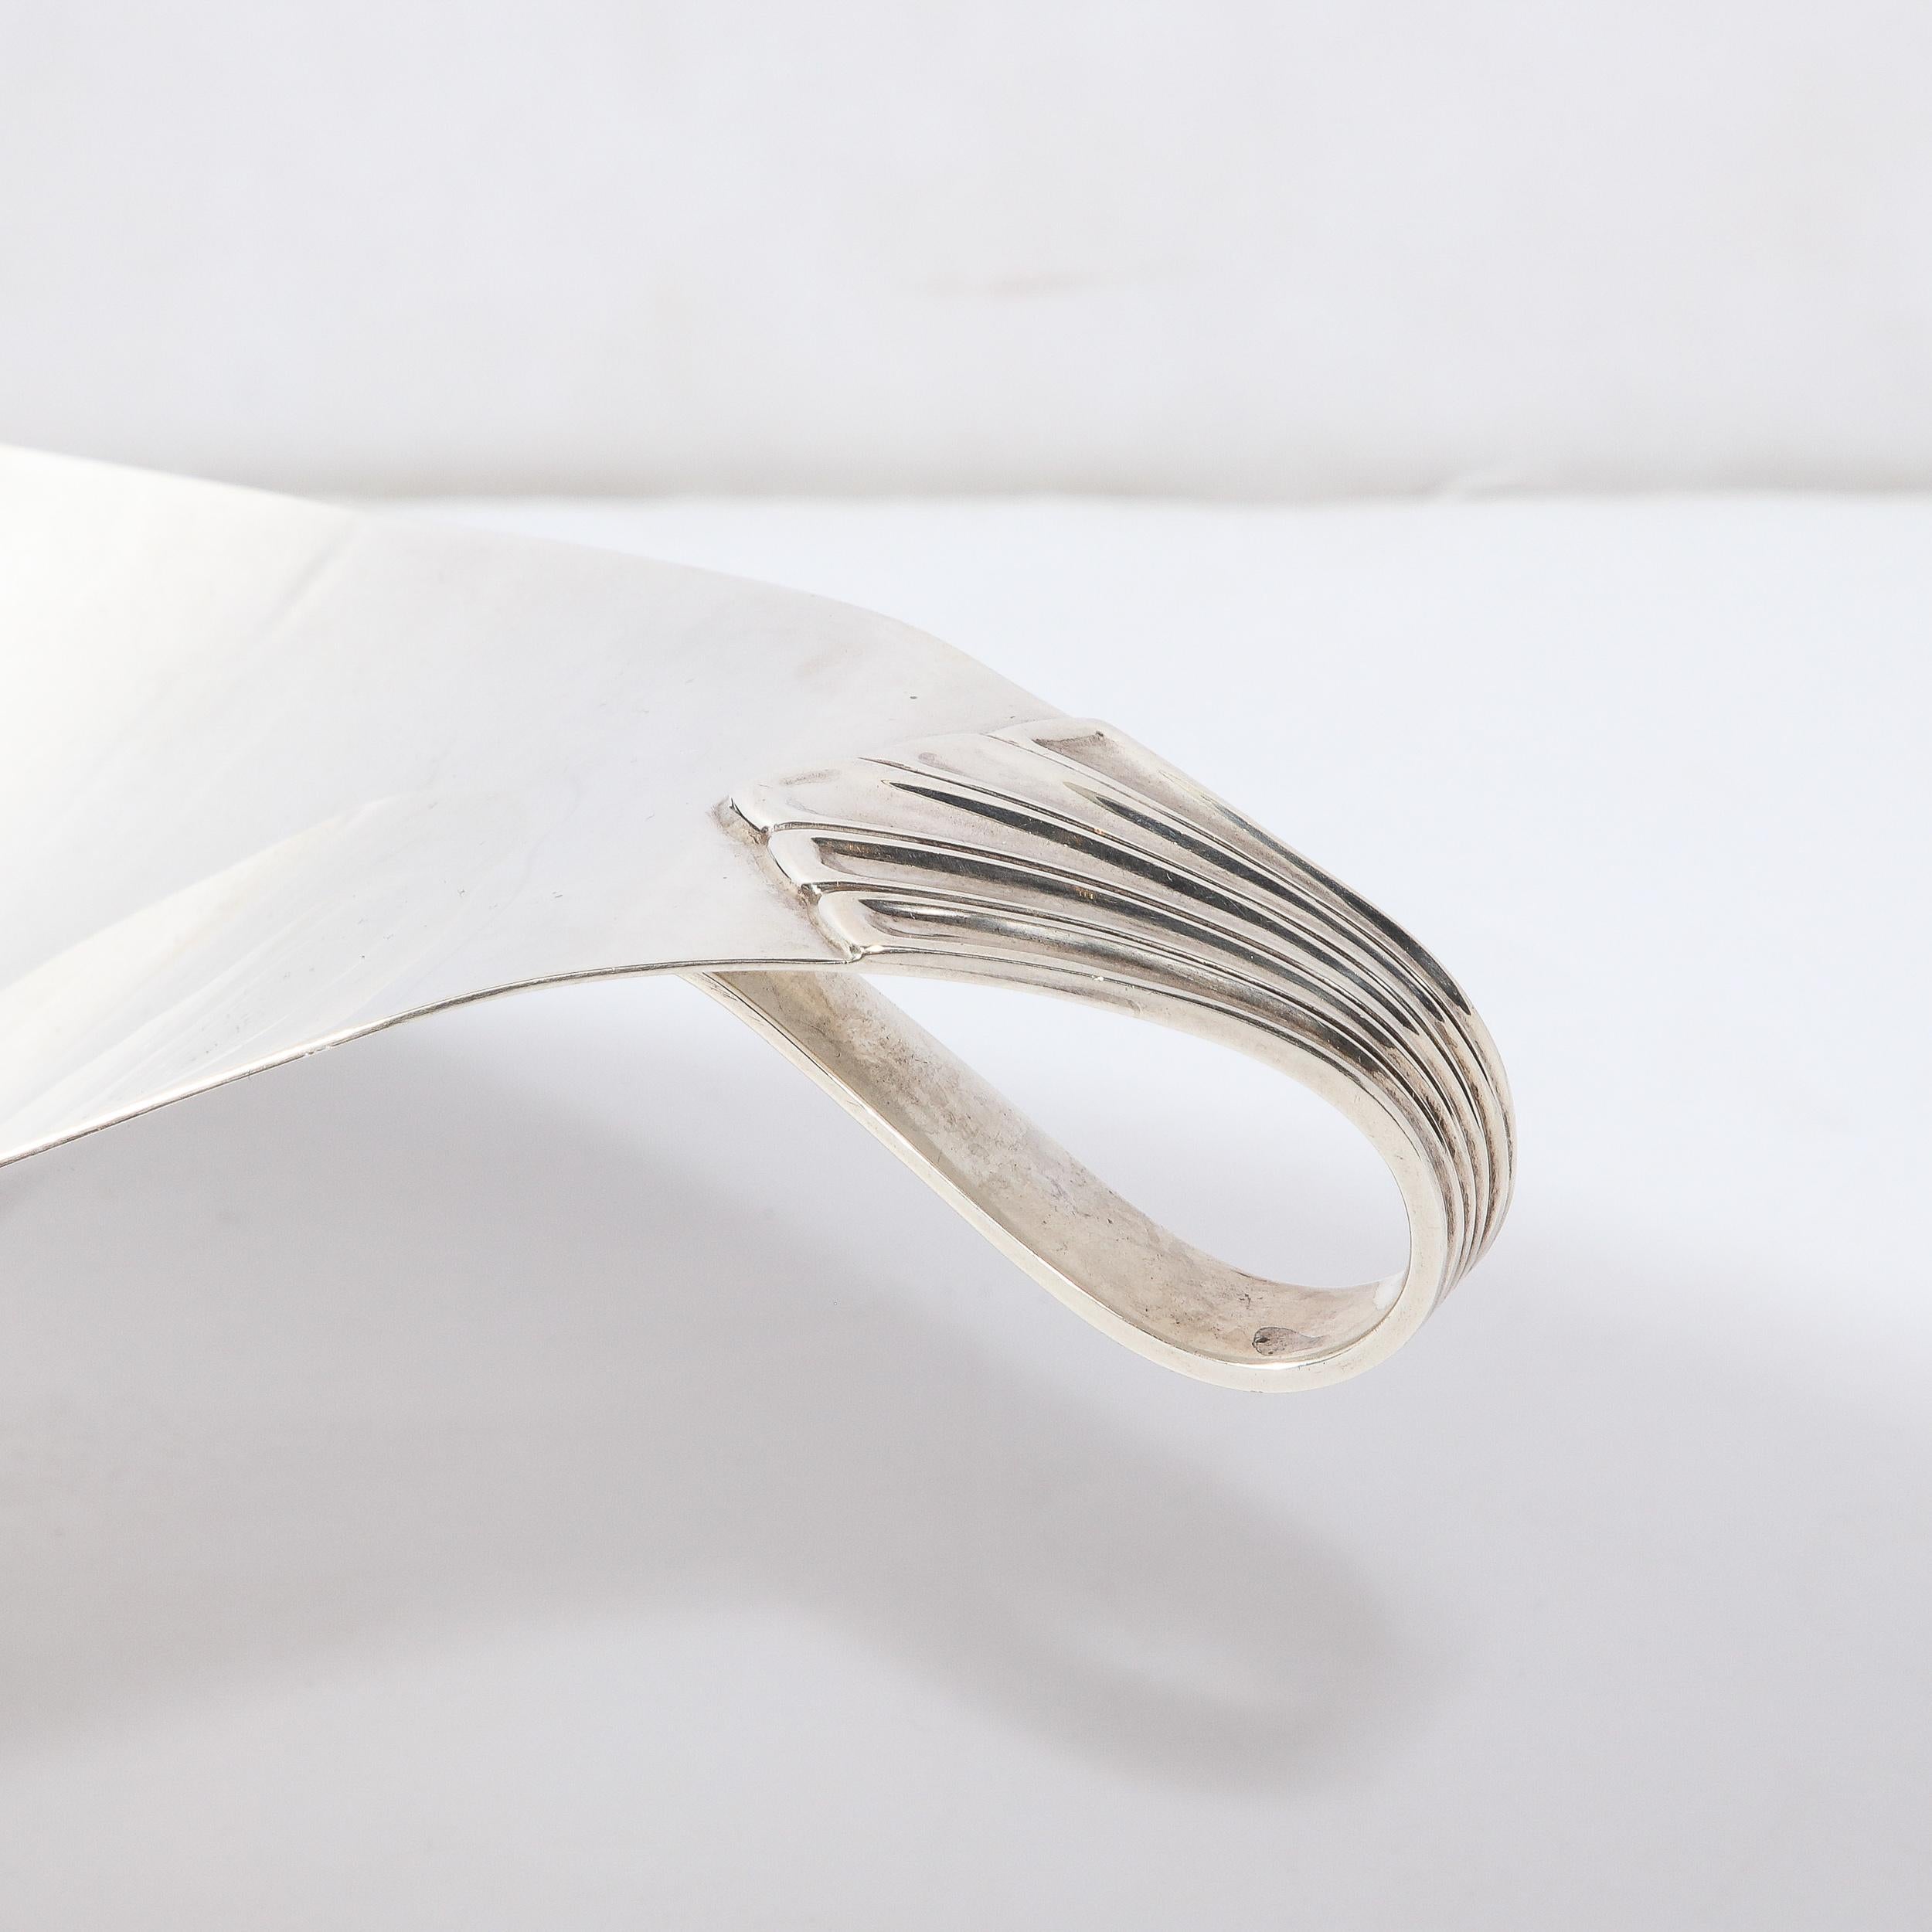 American Rare Modernist Sterling Silver Modernist Centerpiece Bowl by Tiffany and Co